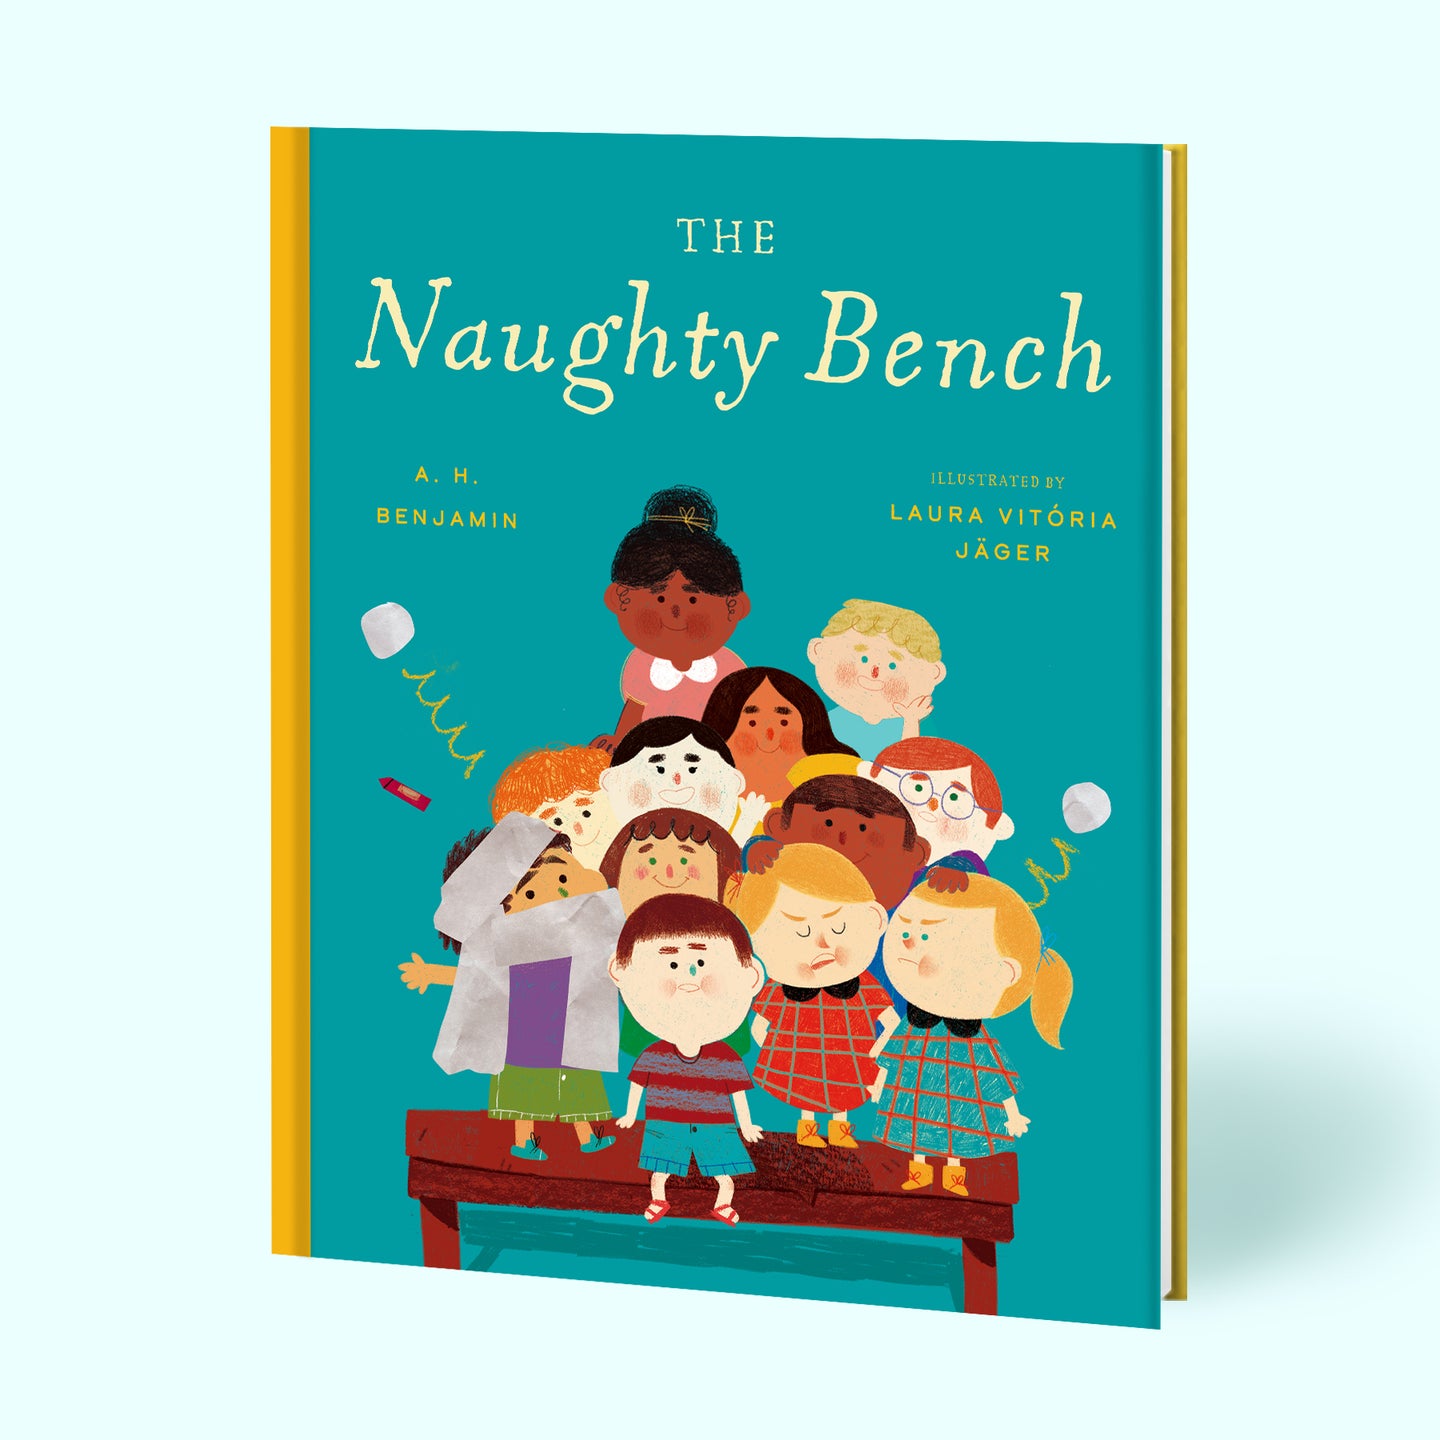 The Naughty Bench